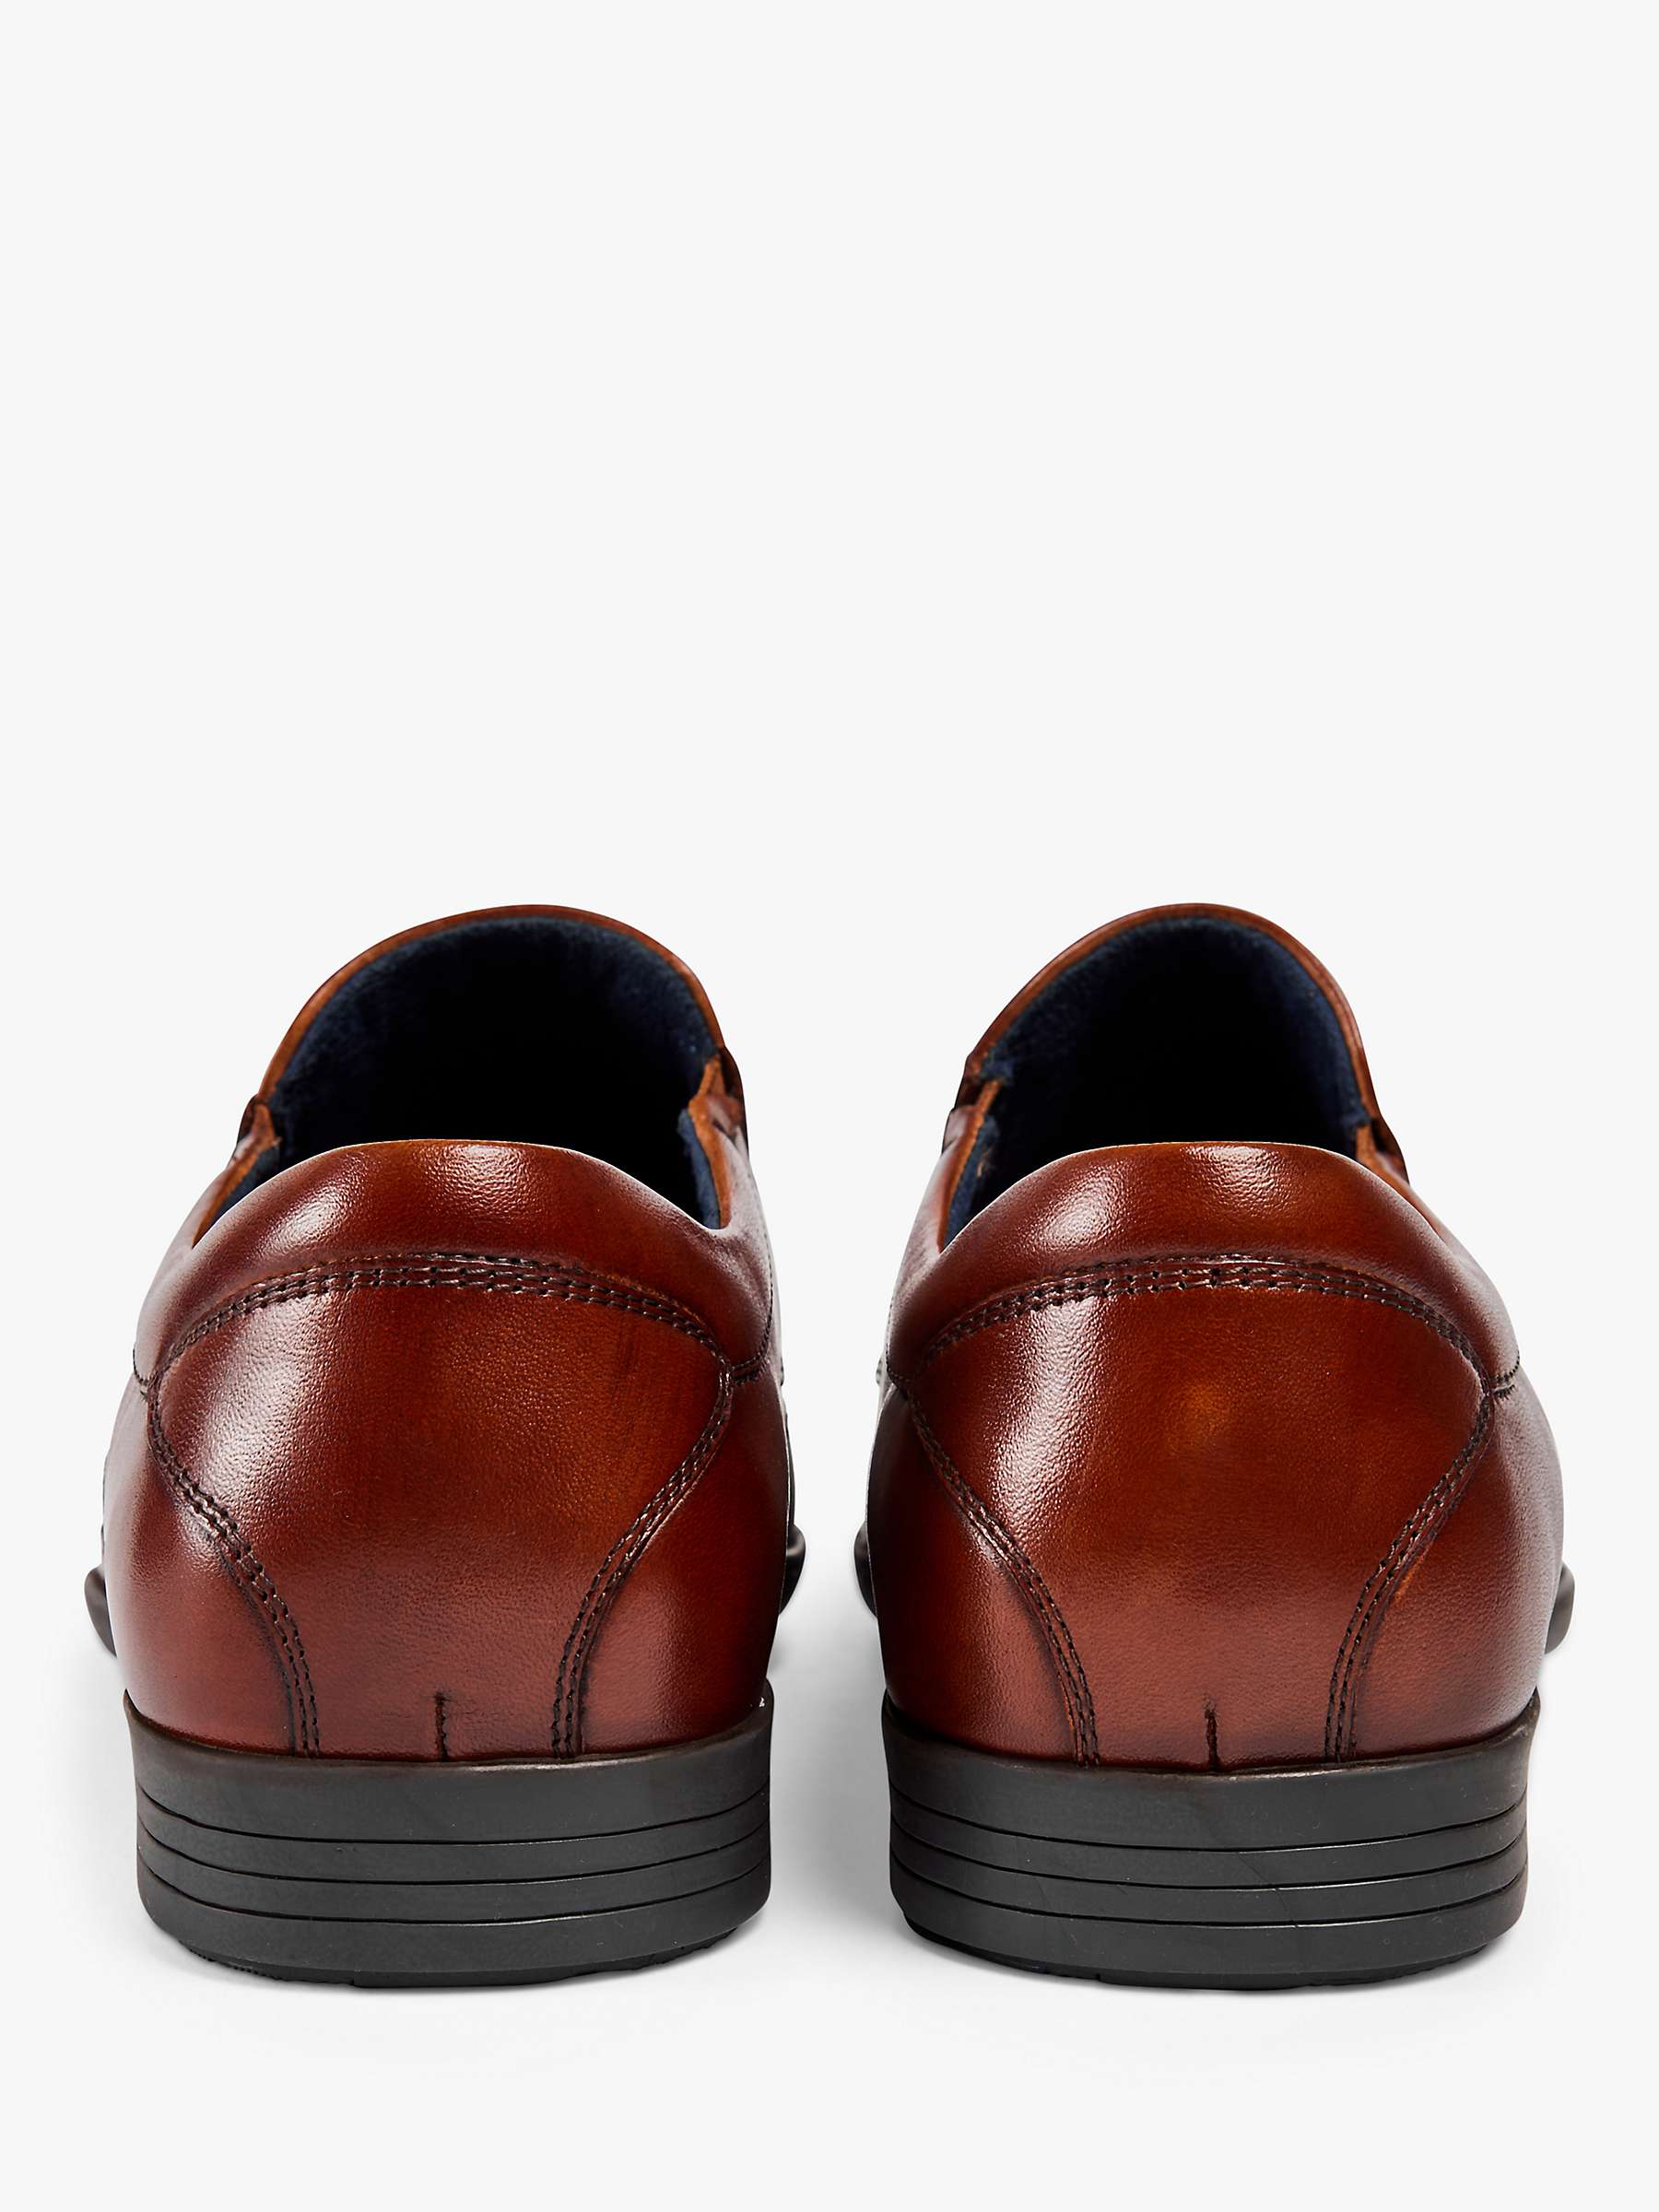 Buy Pod Dundee Leather Loafers, Cognac Online at johnlewis.com